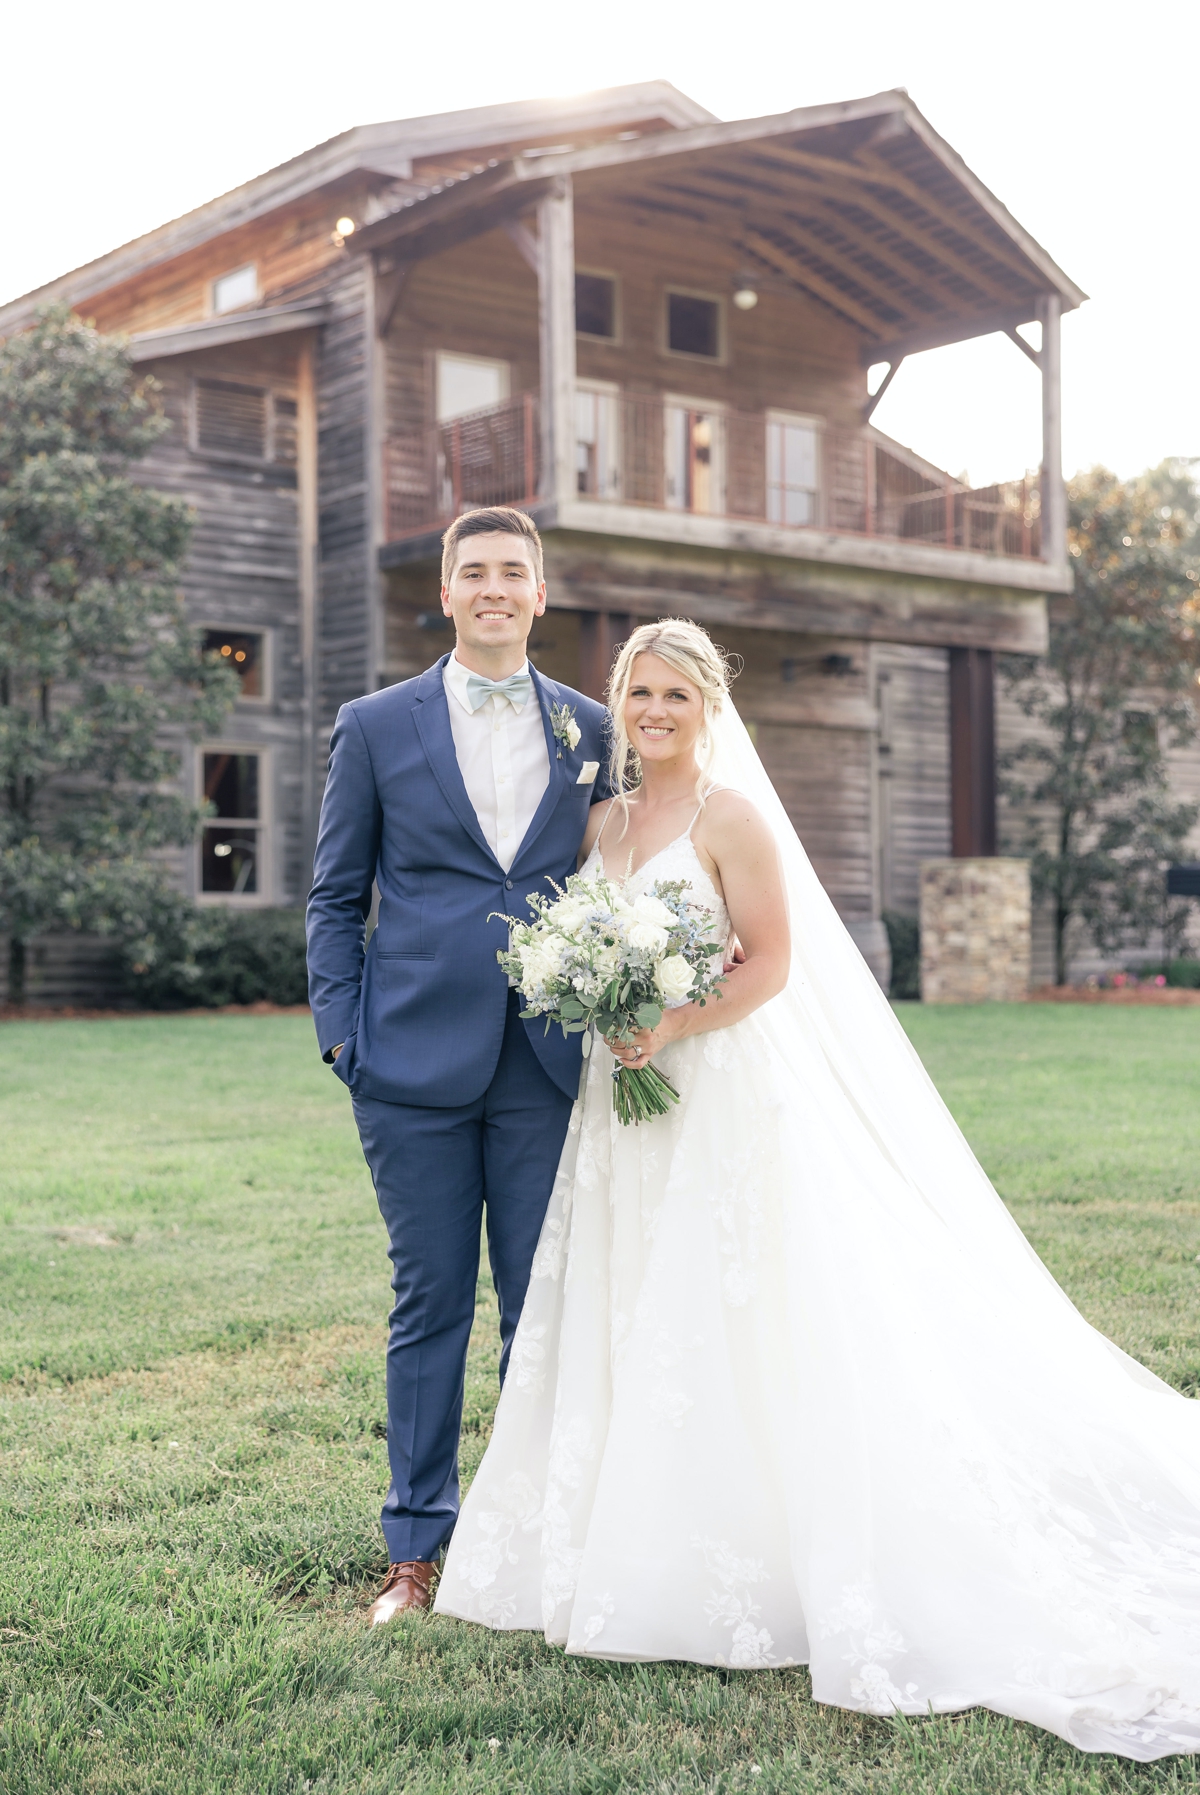 Grace and Chris smiling on their wedding day in front of Walters Barn in Lula GA